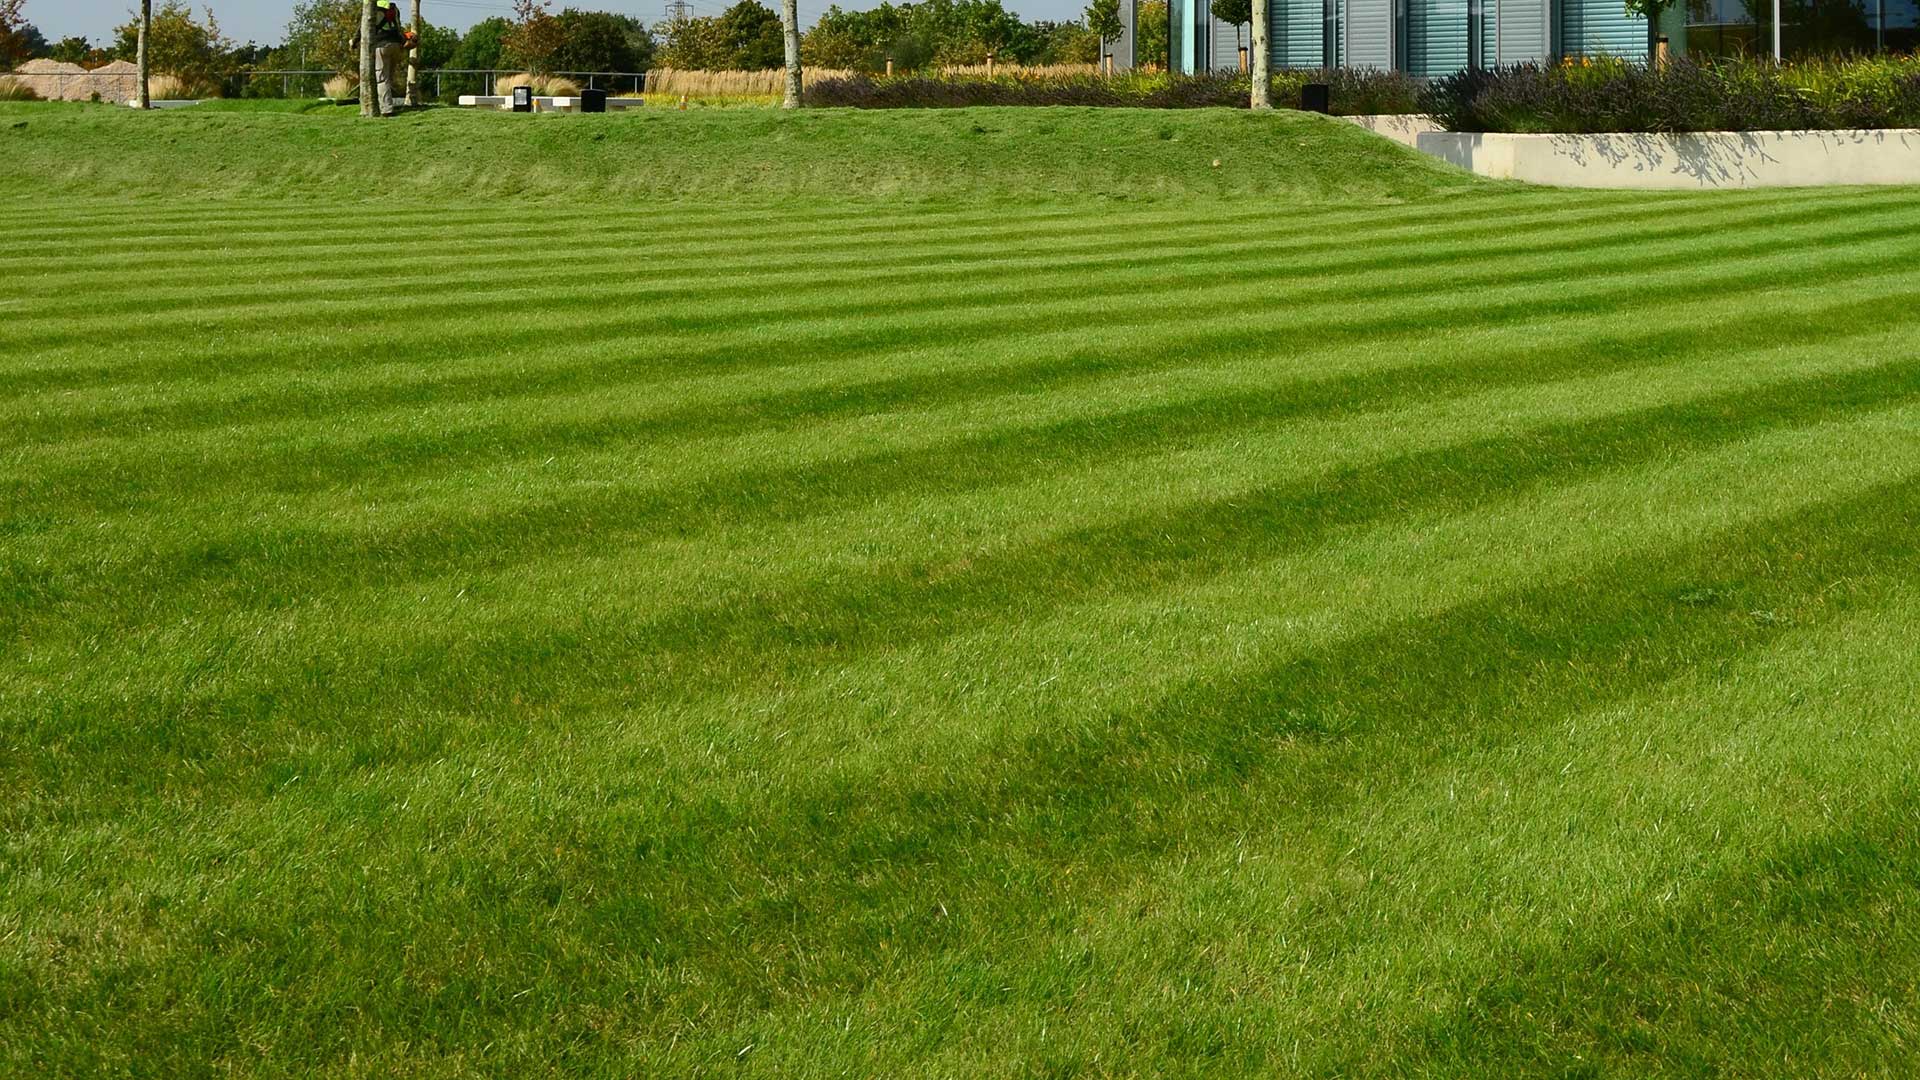 East Lansing, MI commercial property with lawn care services.